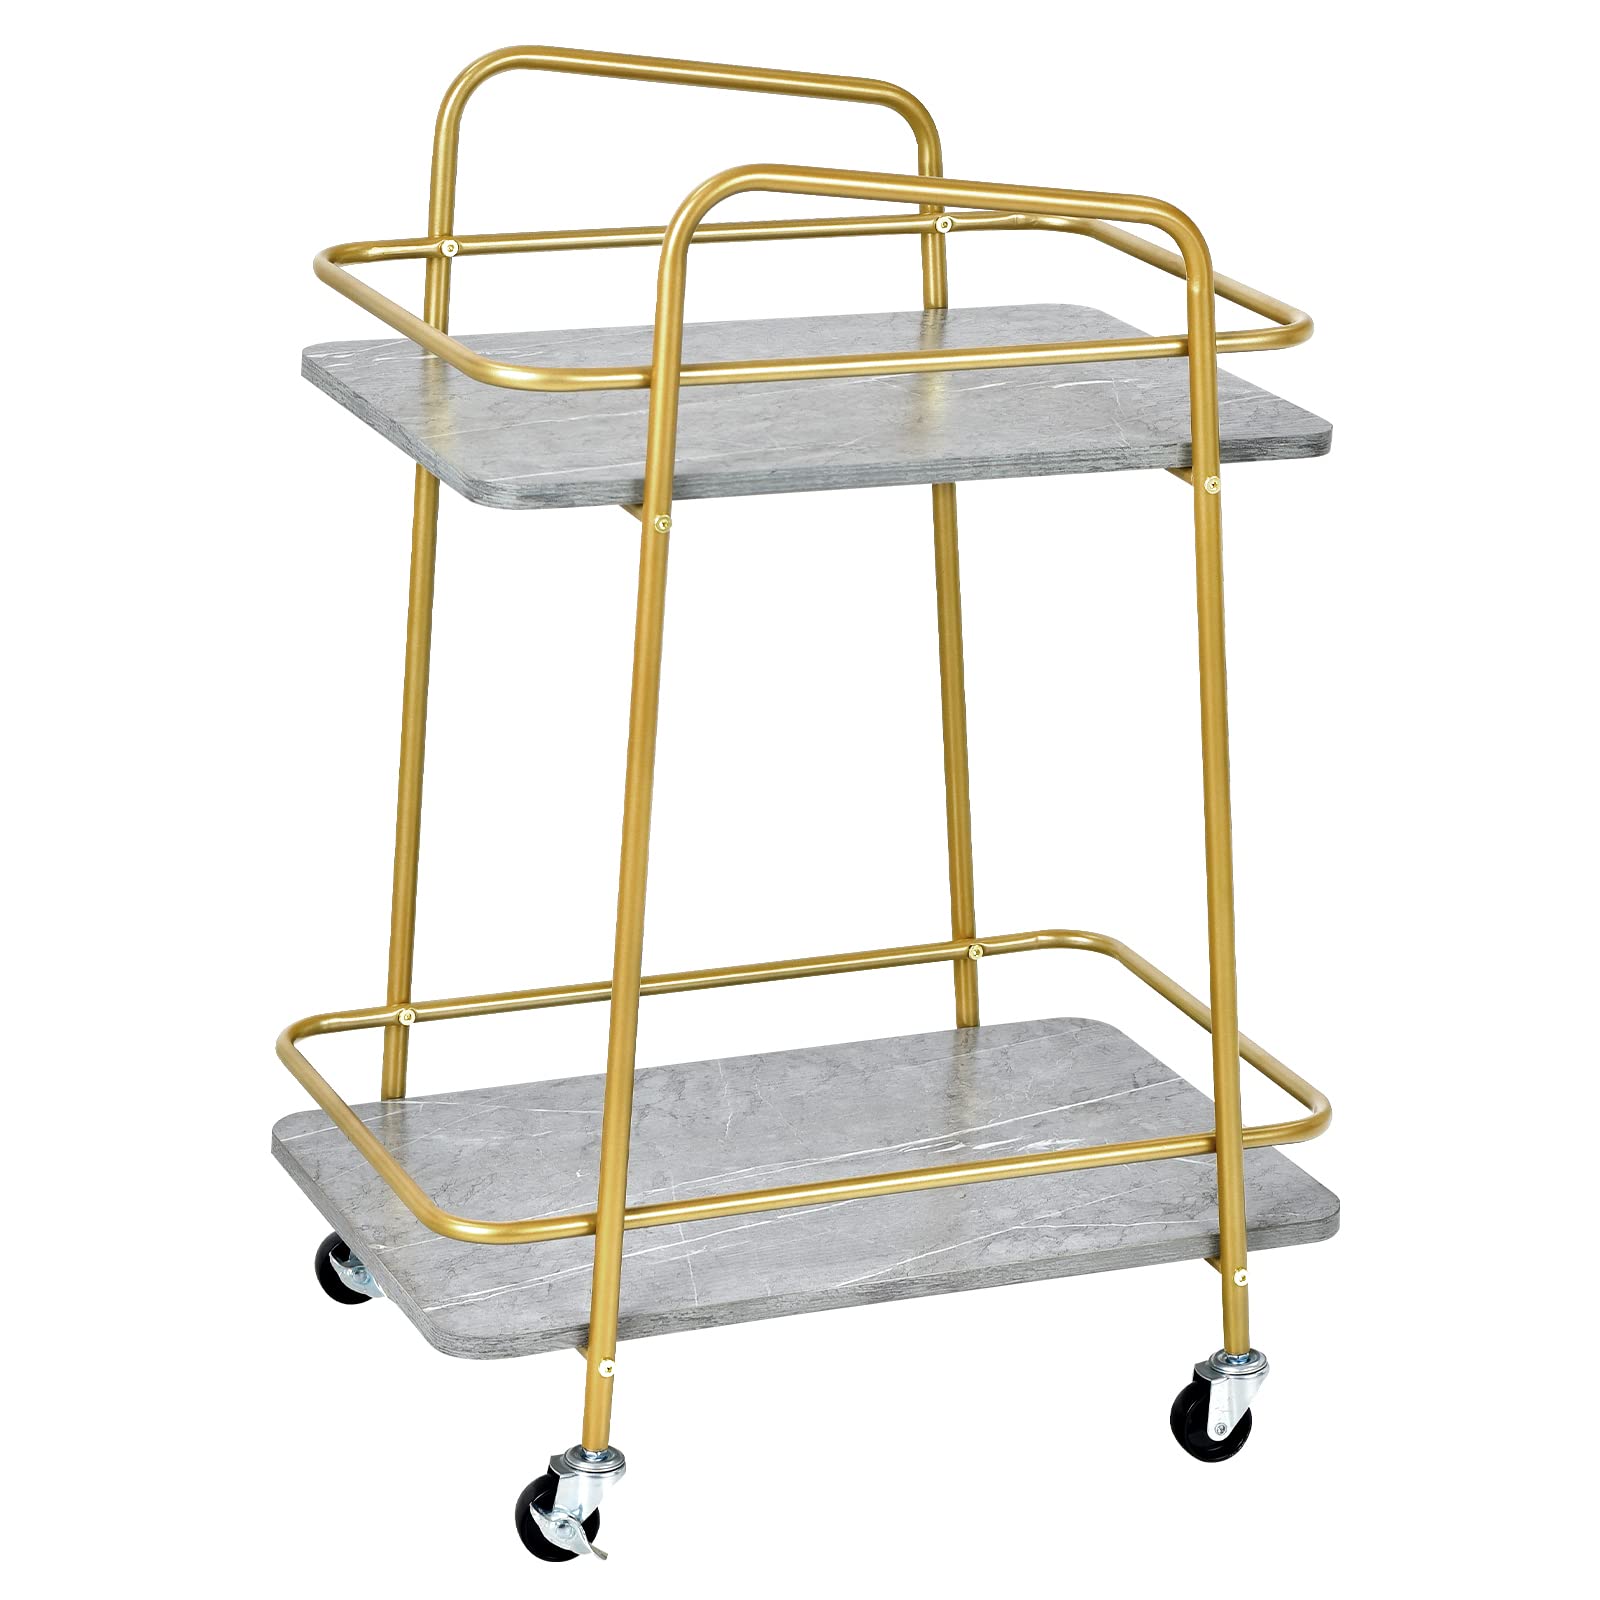 Giantex Gold Bar Cart, Island Service Cart, 2 Tier Storage Shelves with Guardrail for Dining Room Wine Coffee Bar